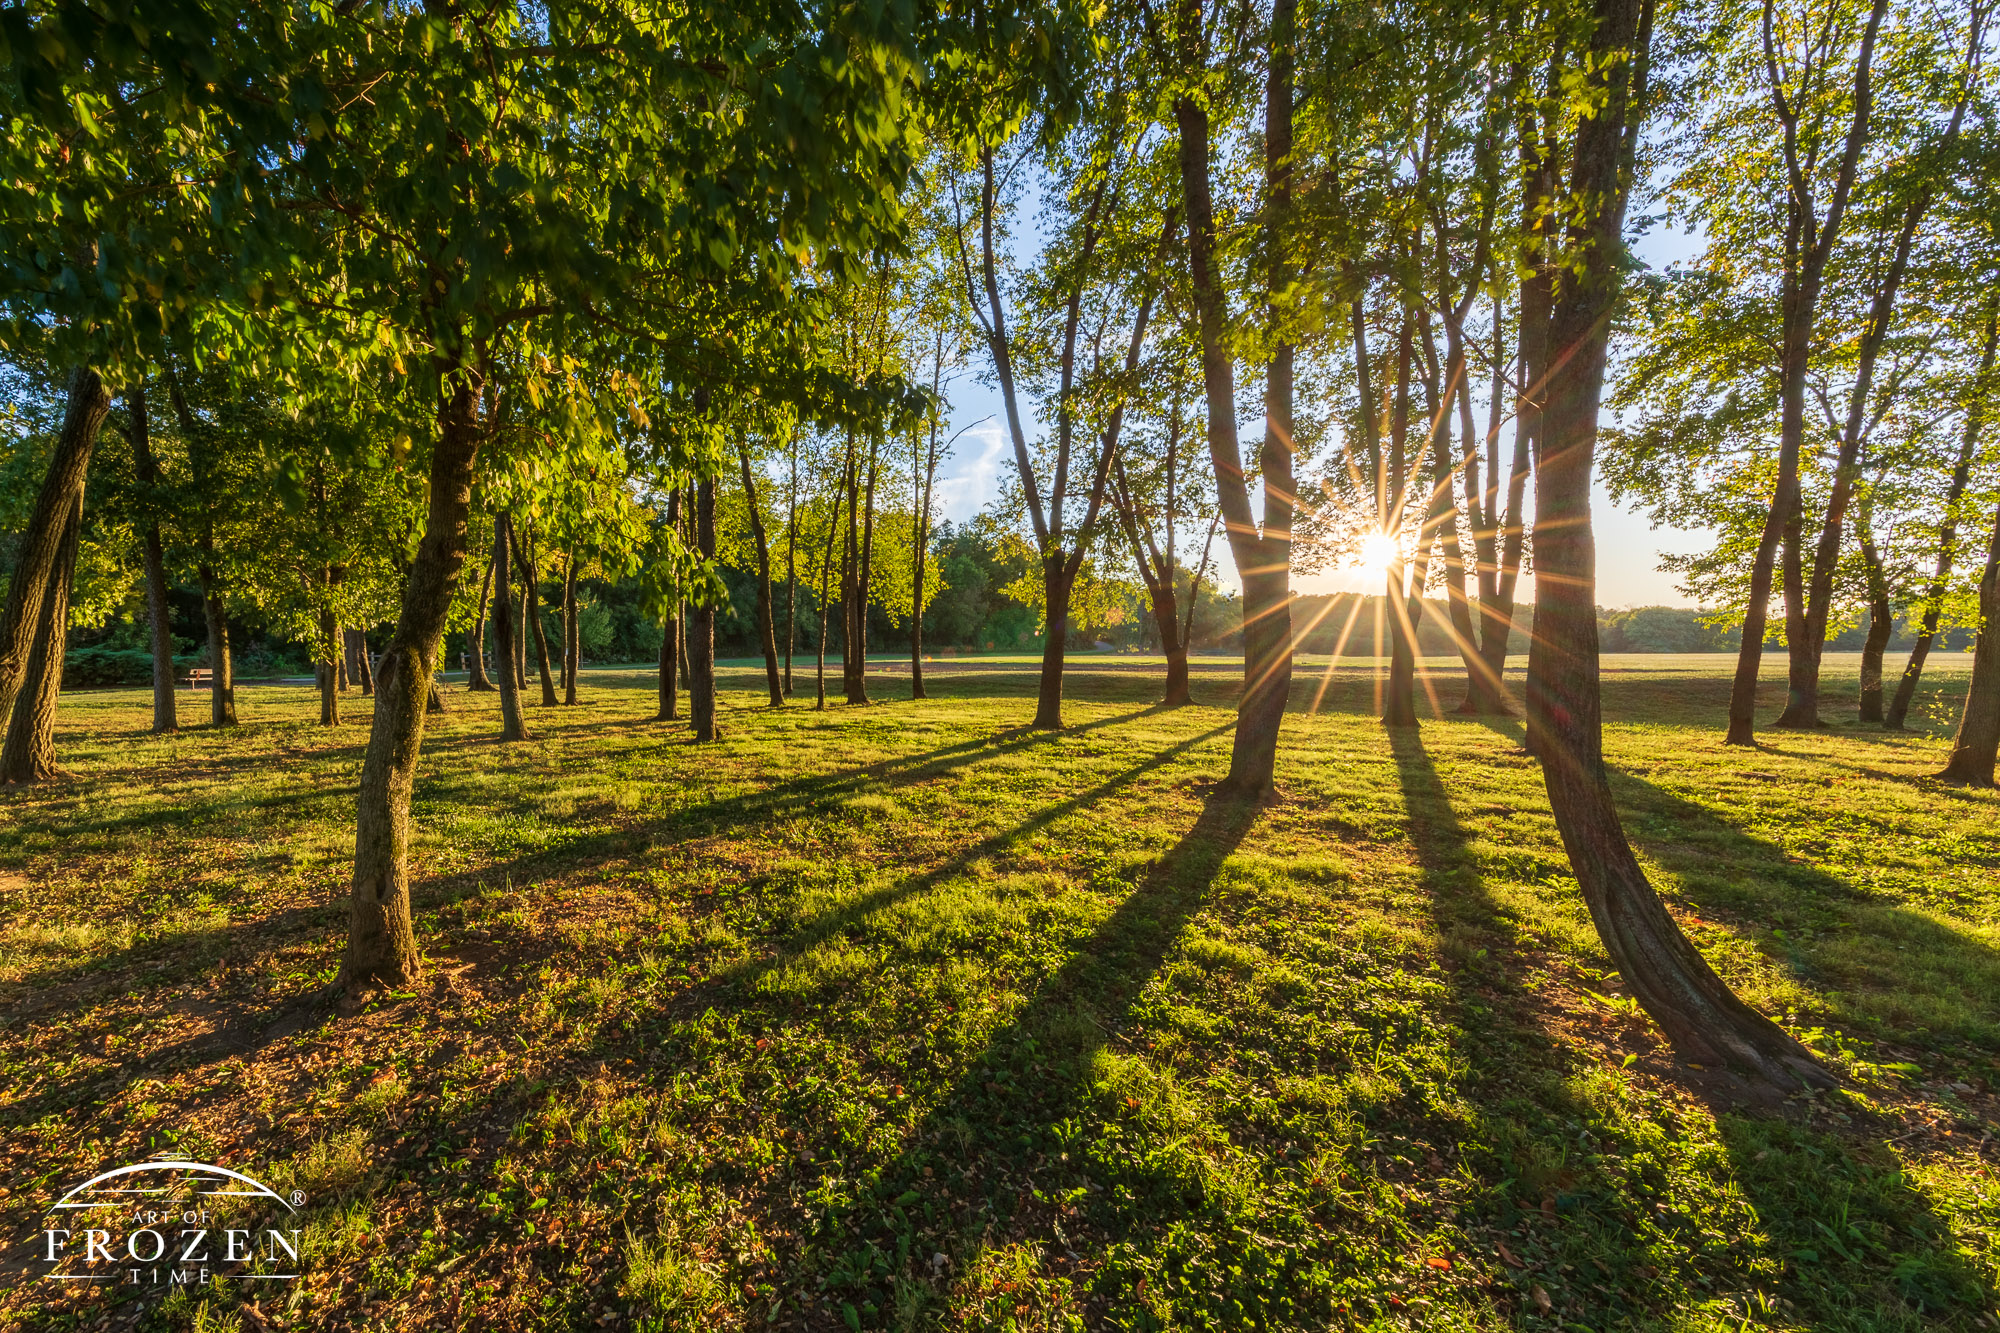 The setting sun shines through a grove of 100 trees on a September evening creating a scene of long shadows and warmly backlit green leaves.